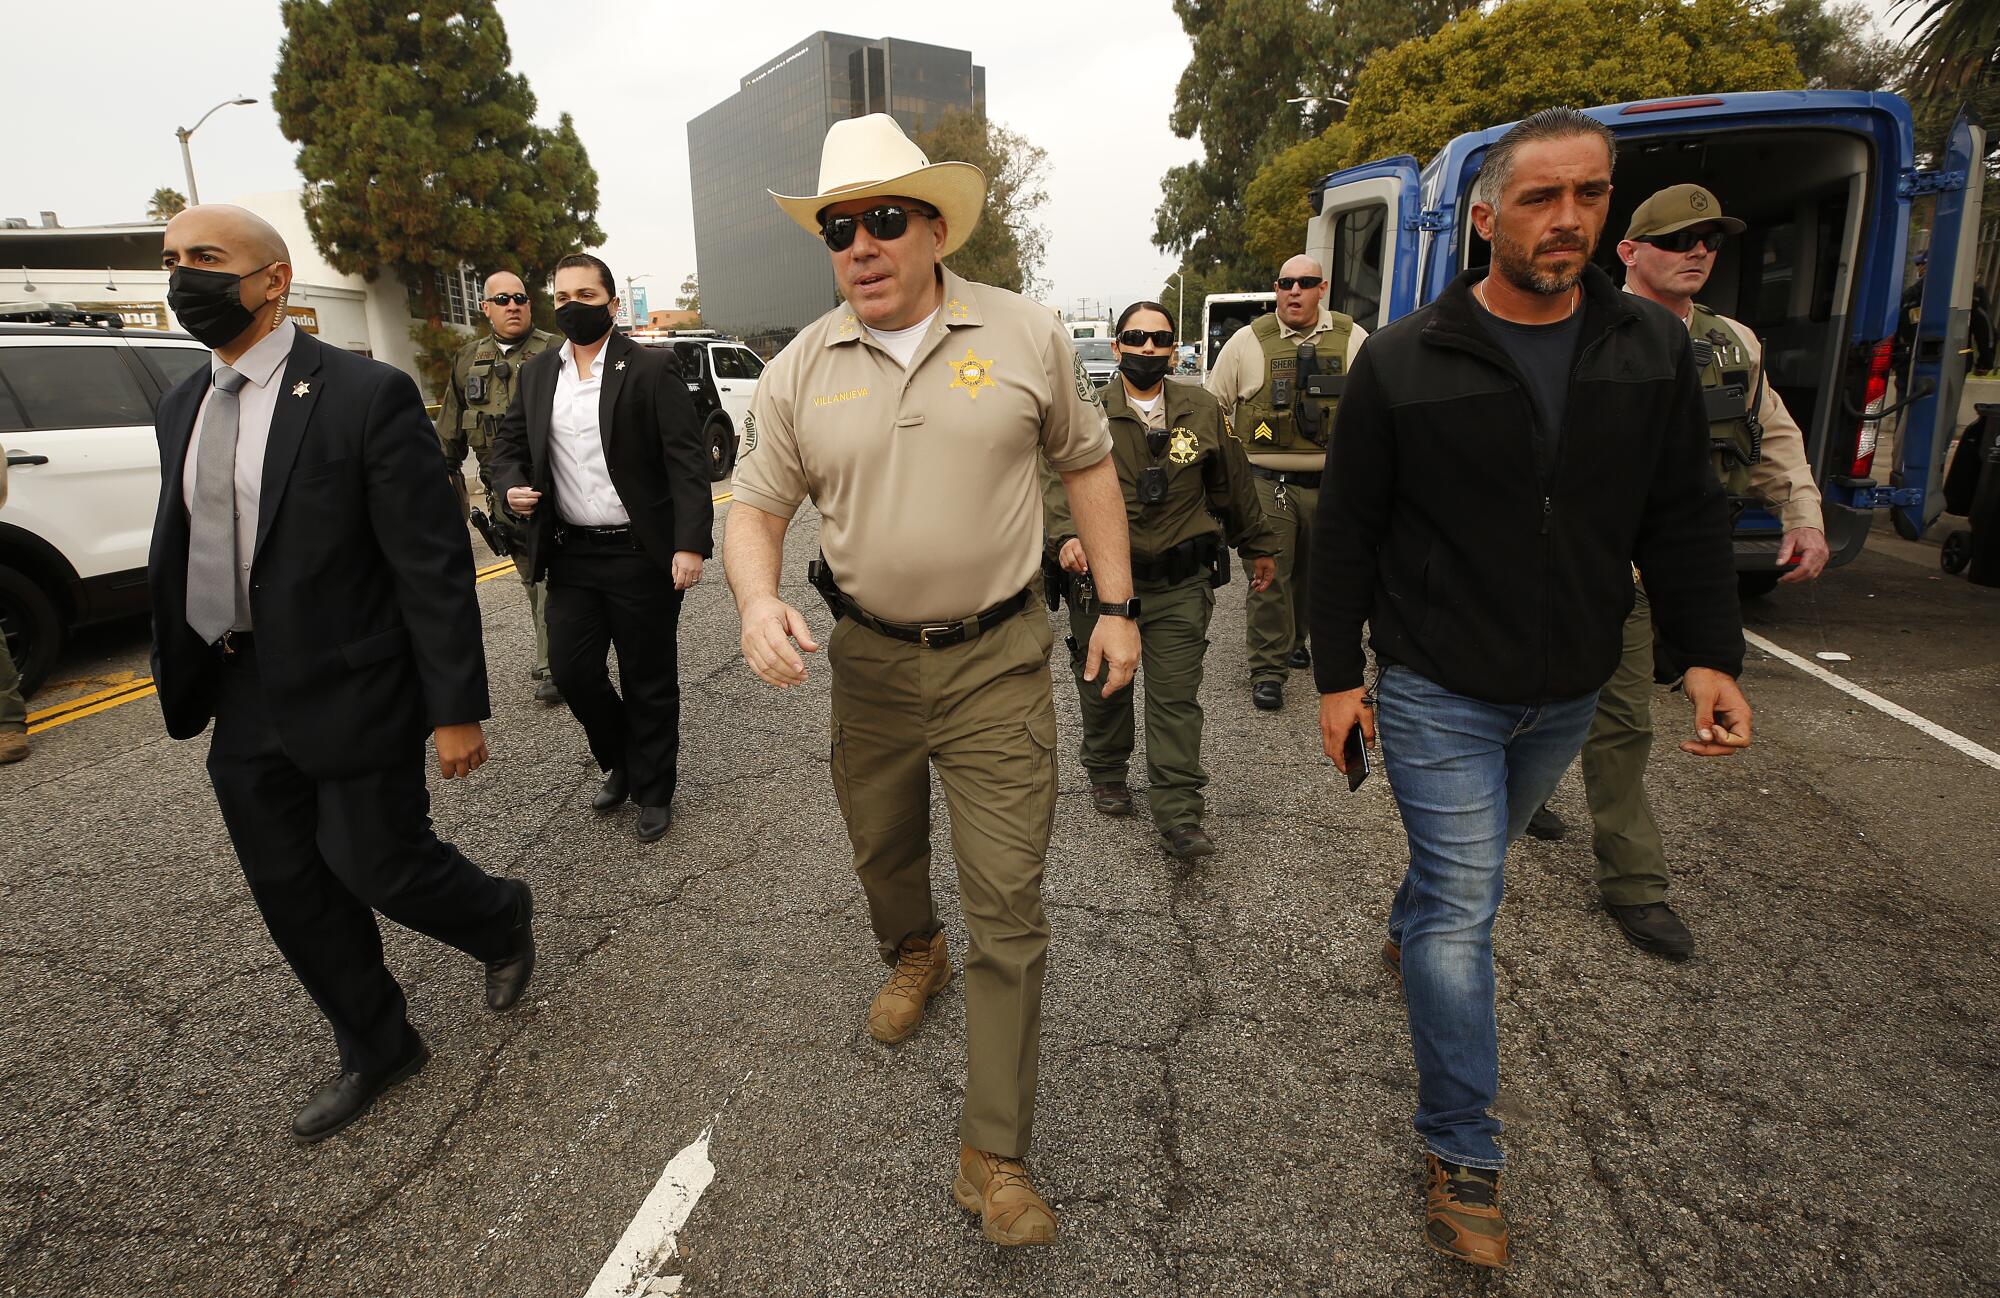 Alex Villanueva, wearing a cowboy hat, walks with others while touring the Veterans Row homeless encampment